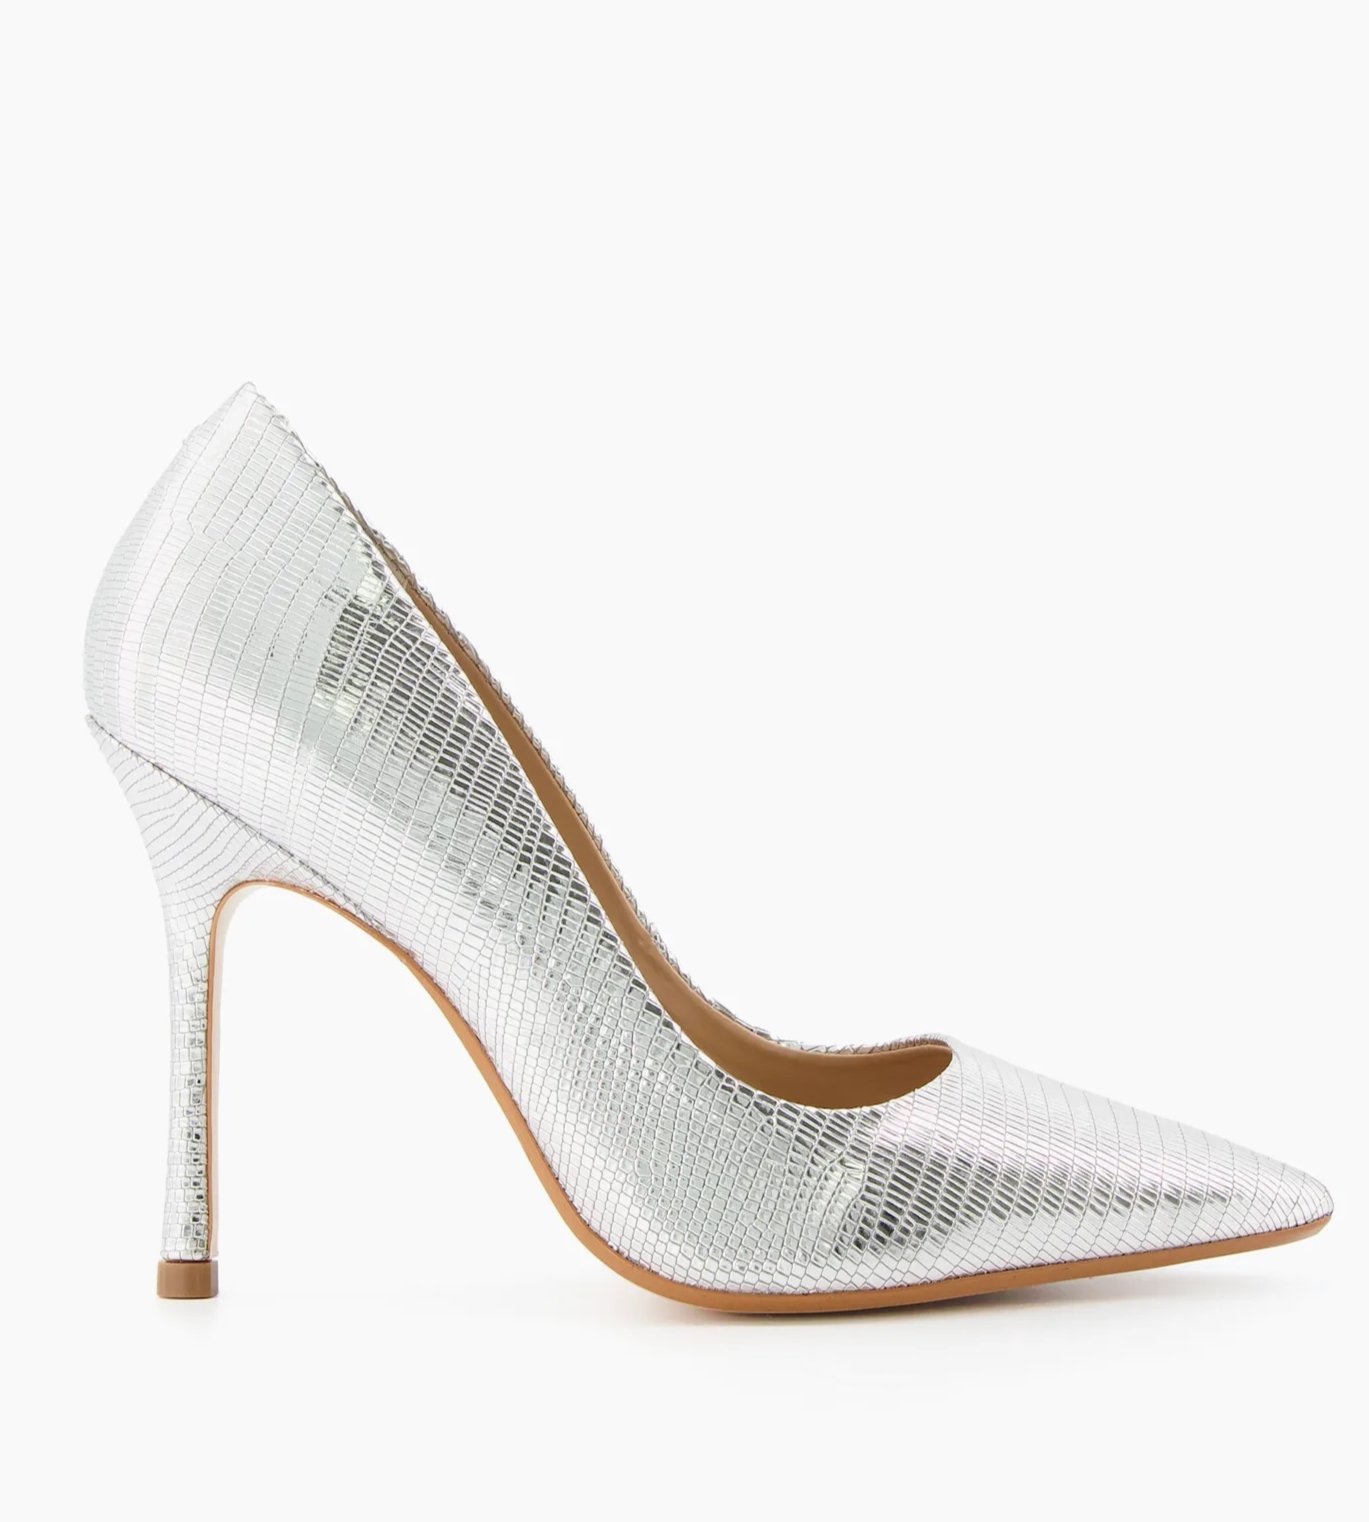 Dune London Belaire Court Shoes in Silver.jpg